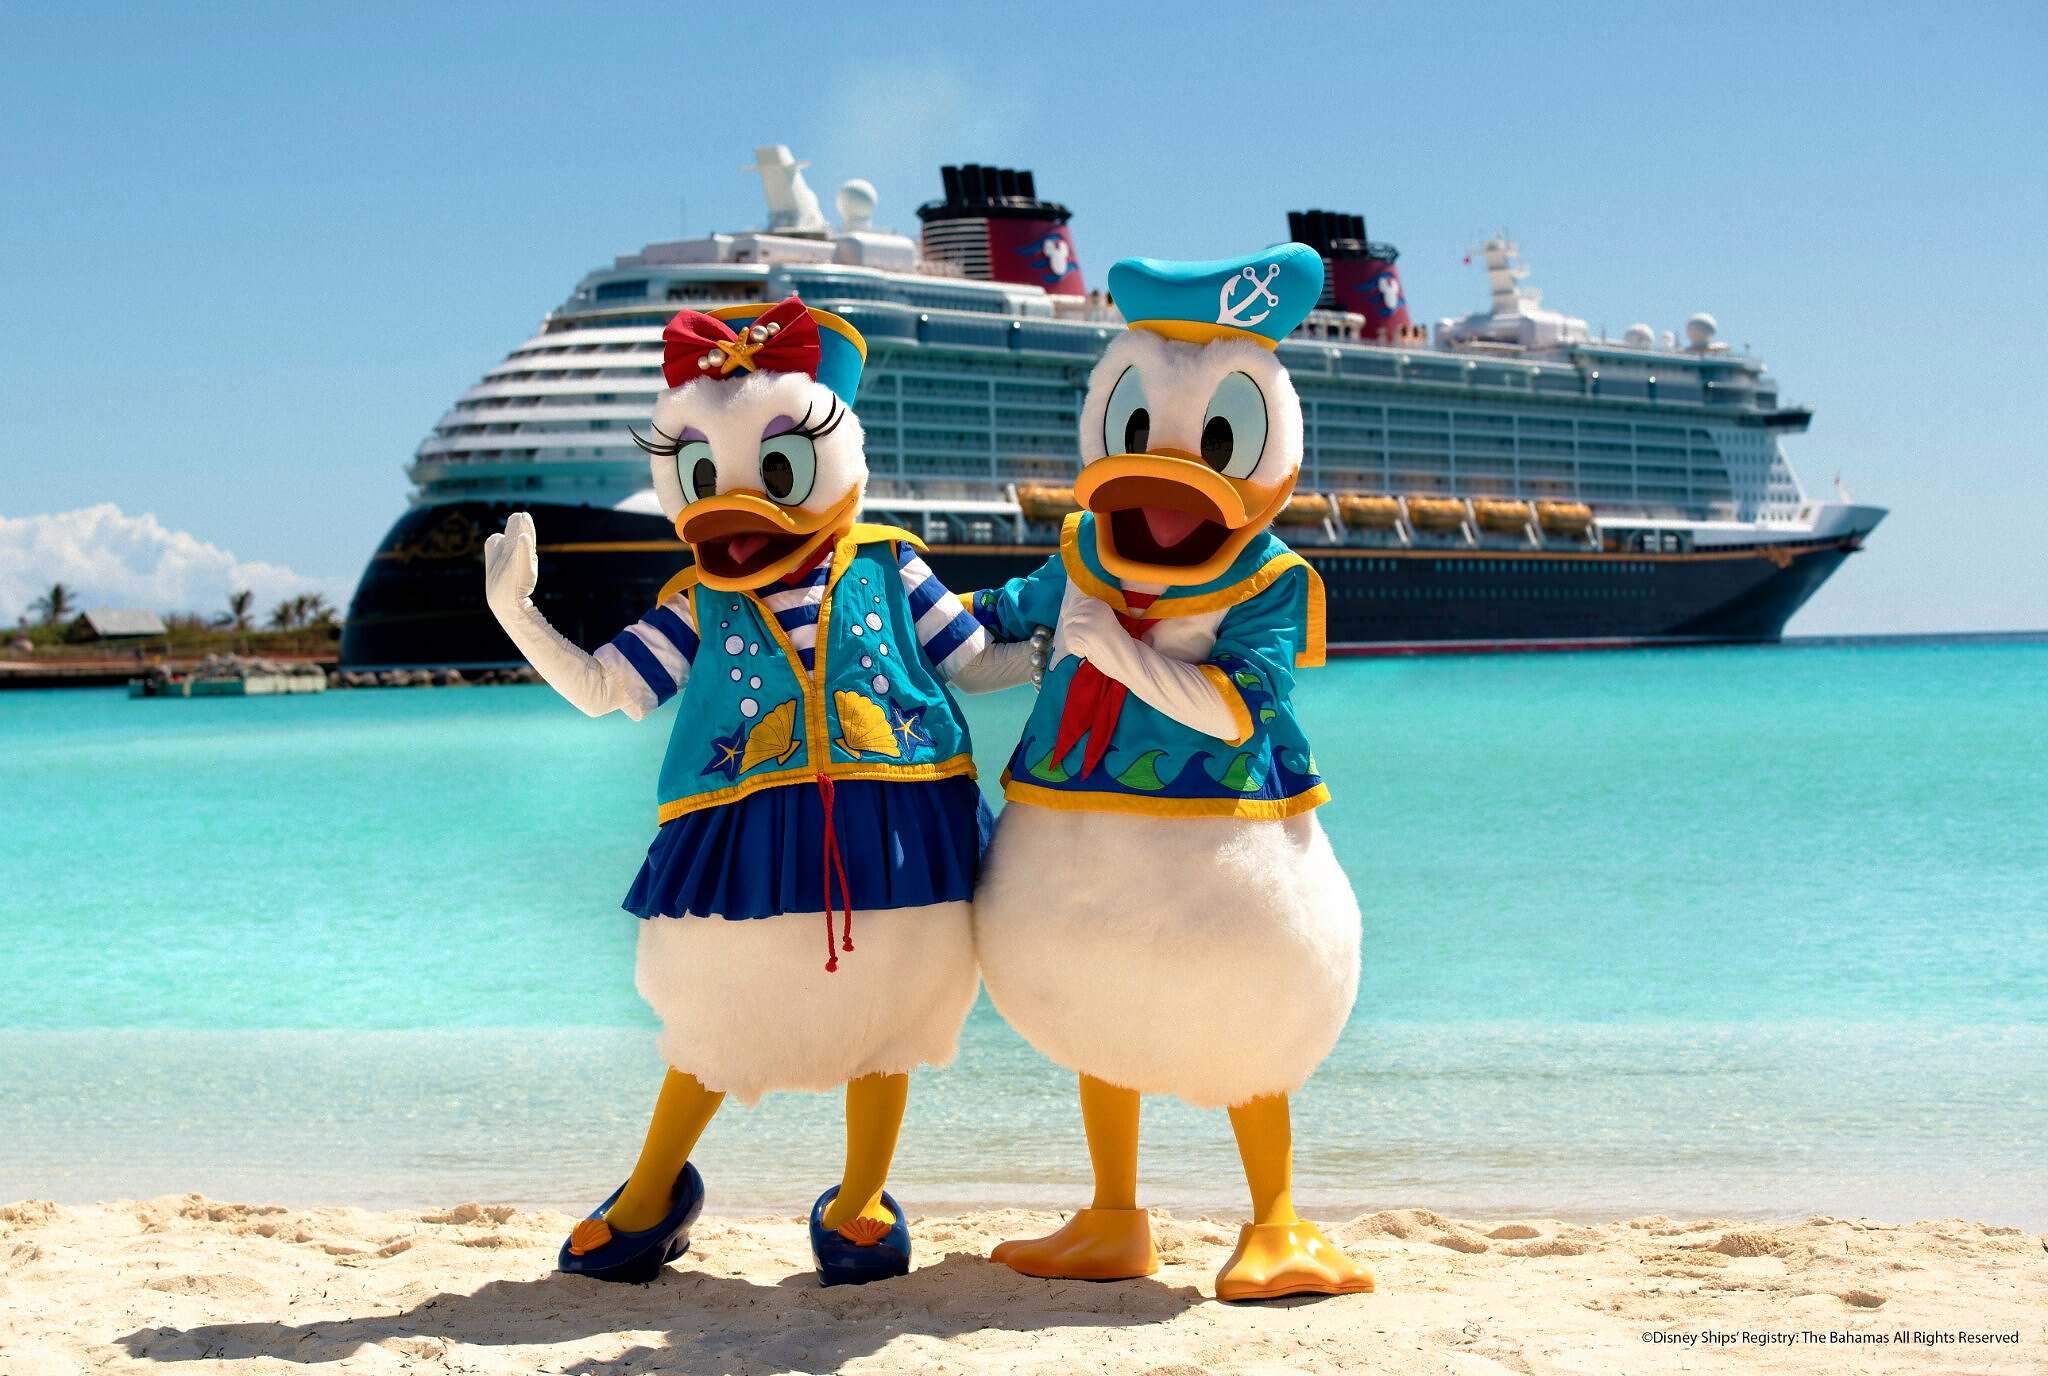 YOUR CHANCE TO WIN A FREE DISNEY CRUISE!